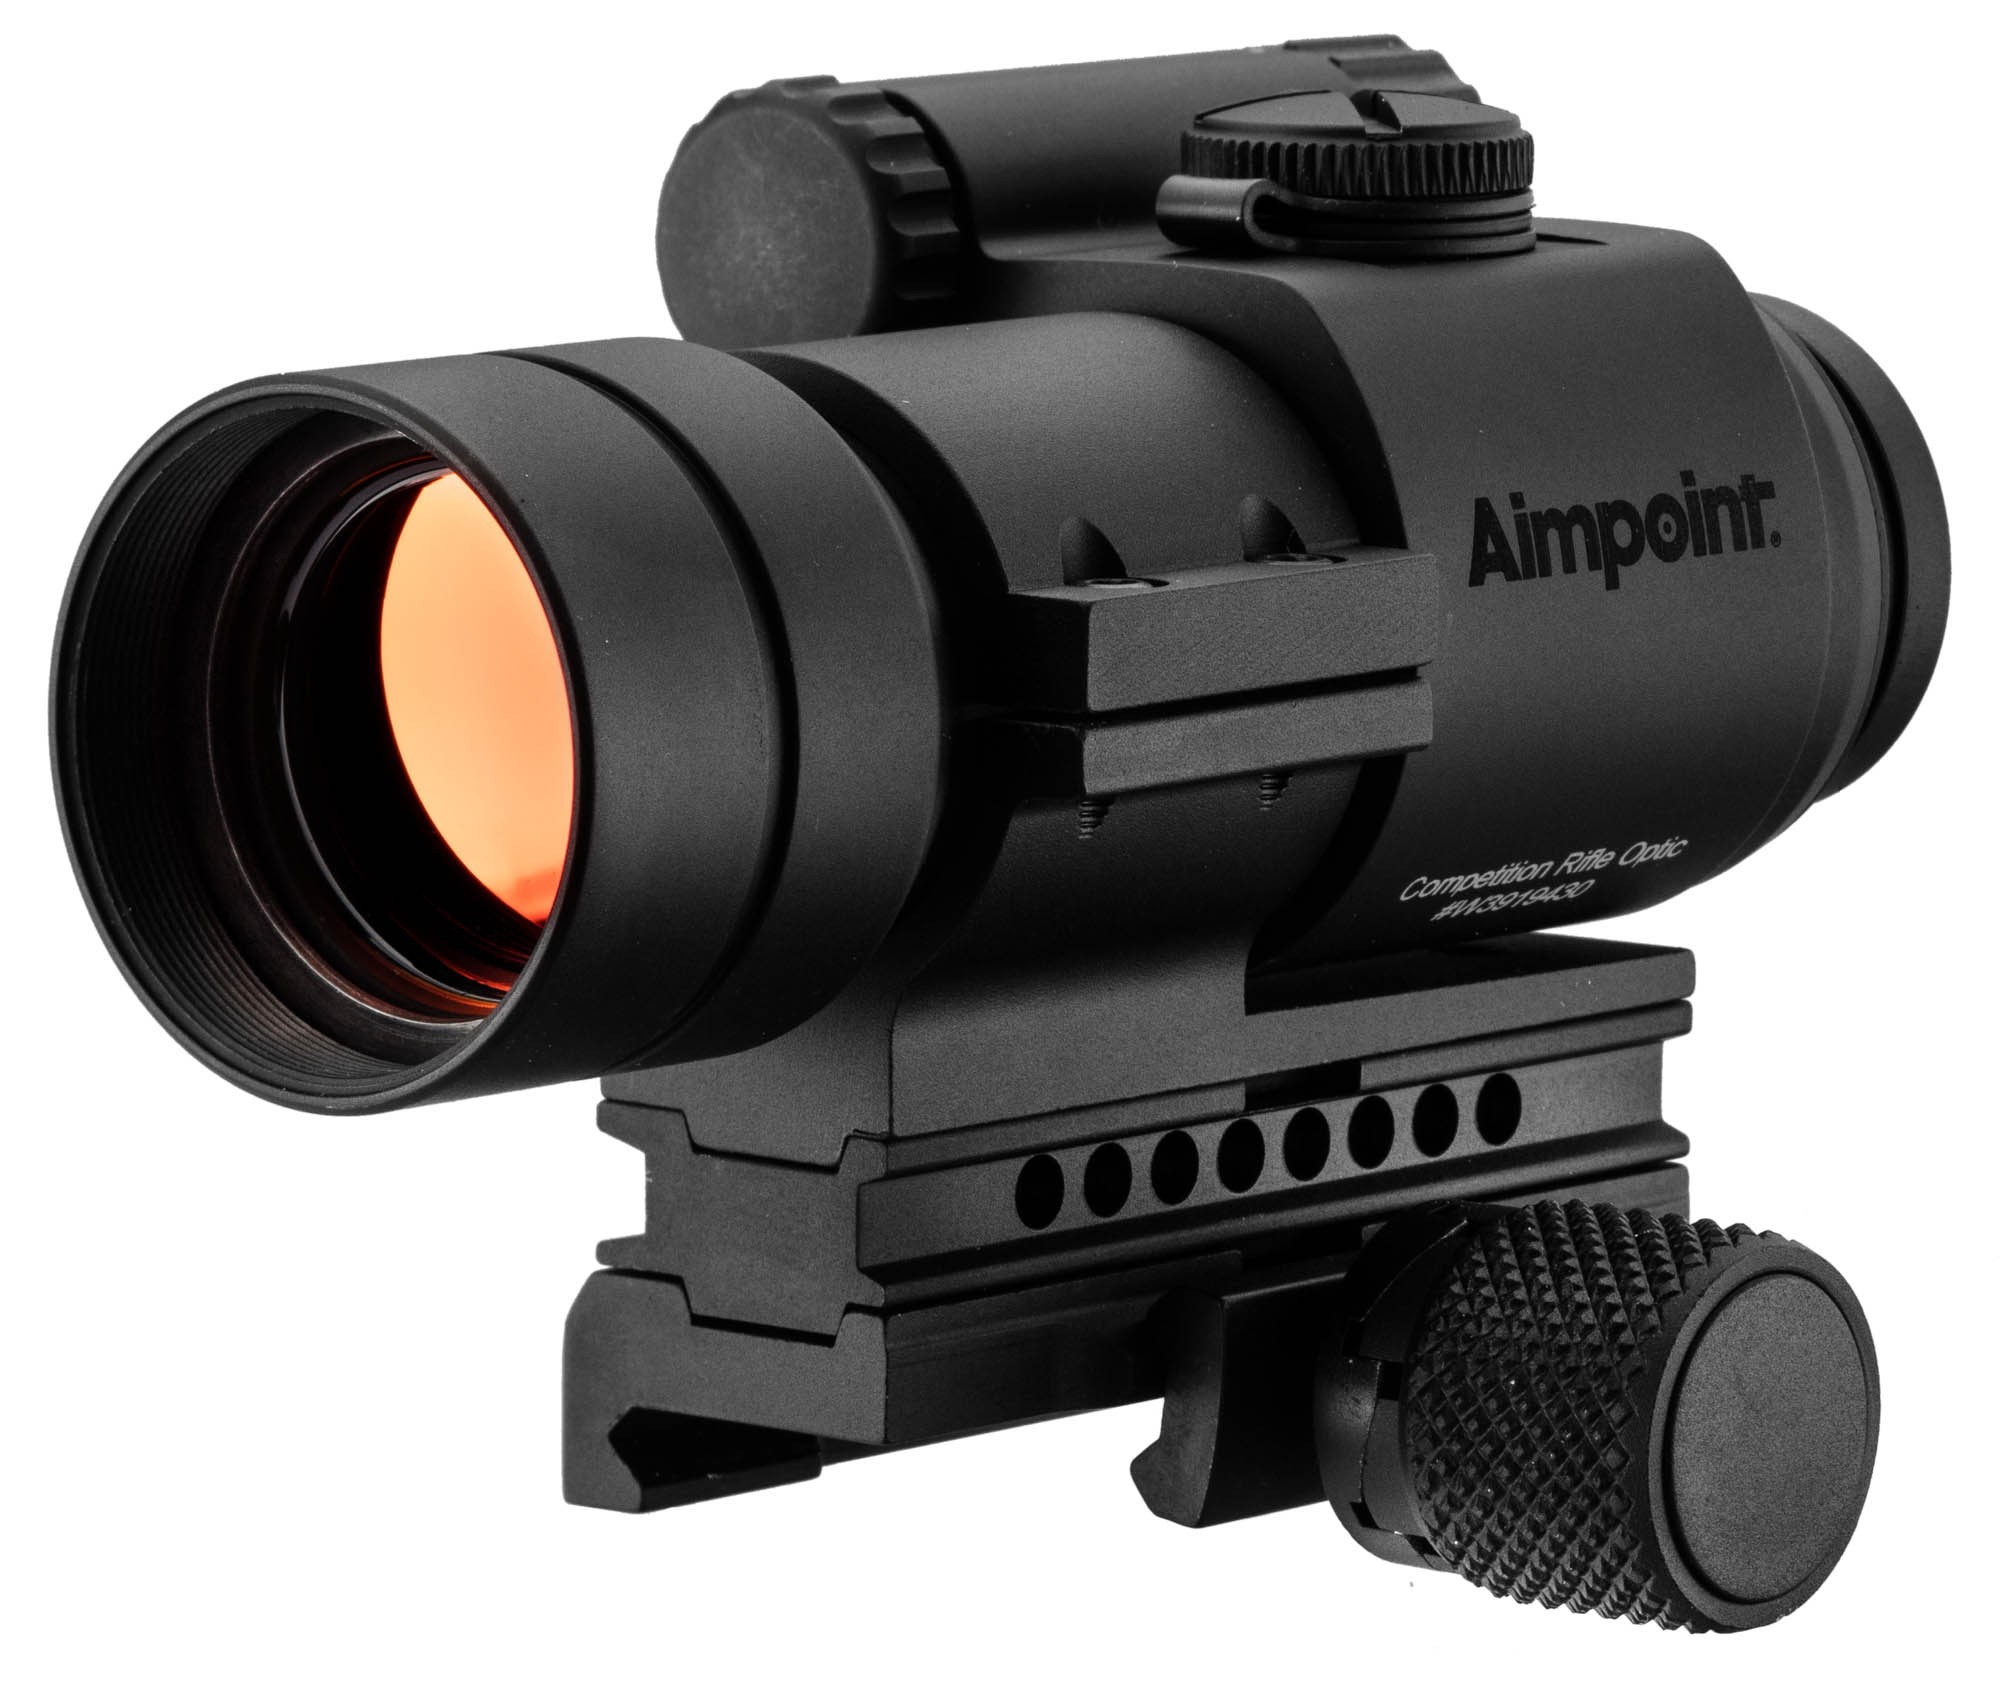 Viseur point rouge Aimpoint Compact CRO 2 MOA, MADE IN CHASSE - Equipements de chasse